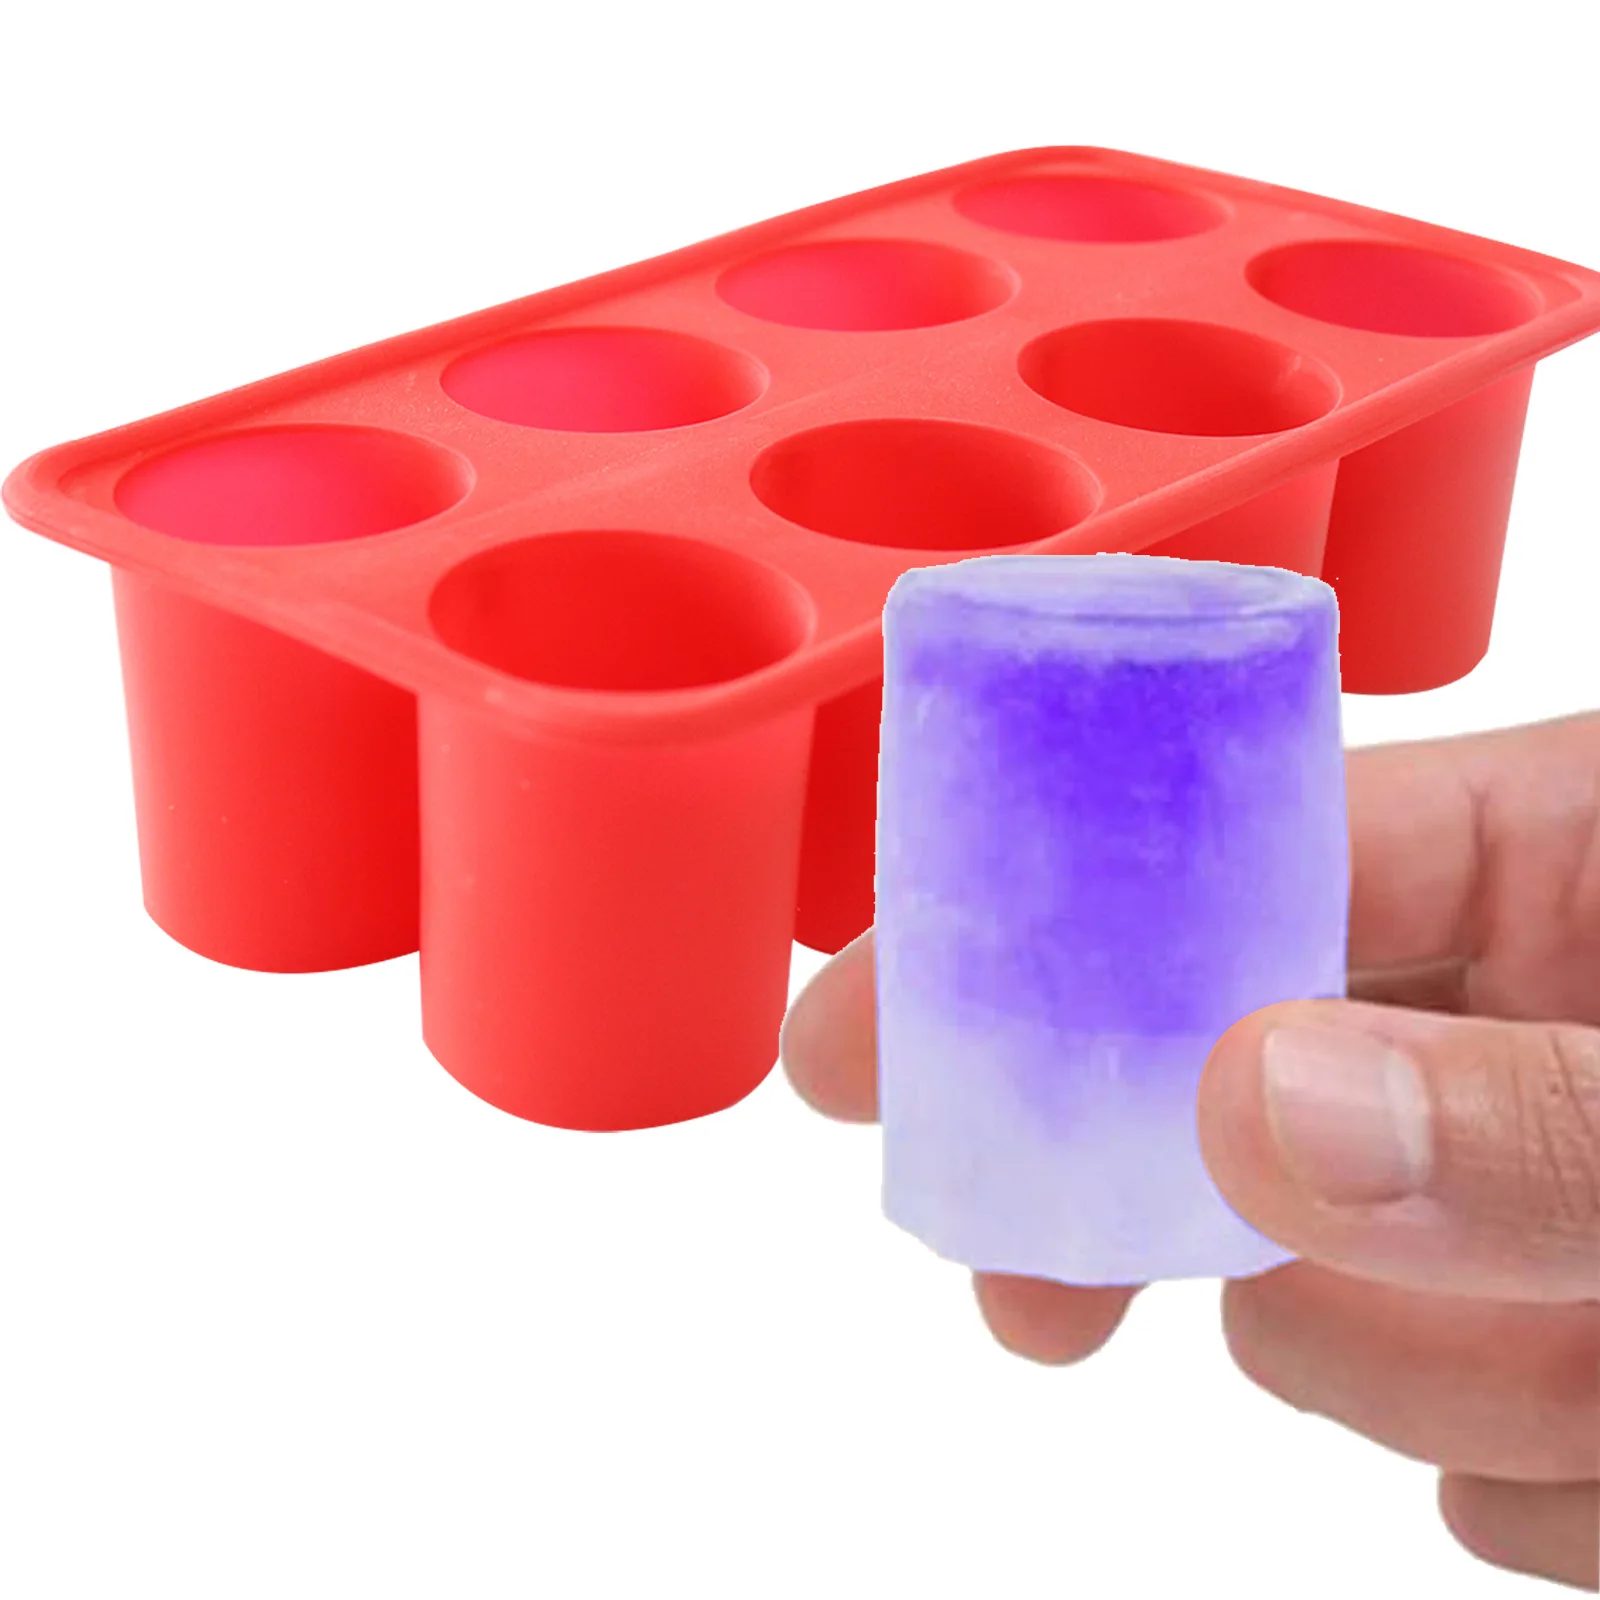 

0986 Creative Silicone Cylindrical Glass Ice Cup 8 Hole Ice Tray Small Wine Cup DIY Chocolate Cup Cake Decoration Candle Mold, Red